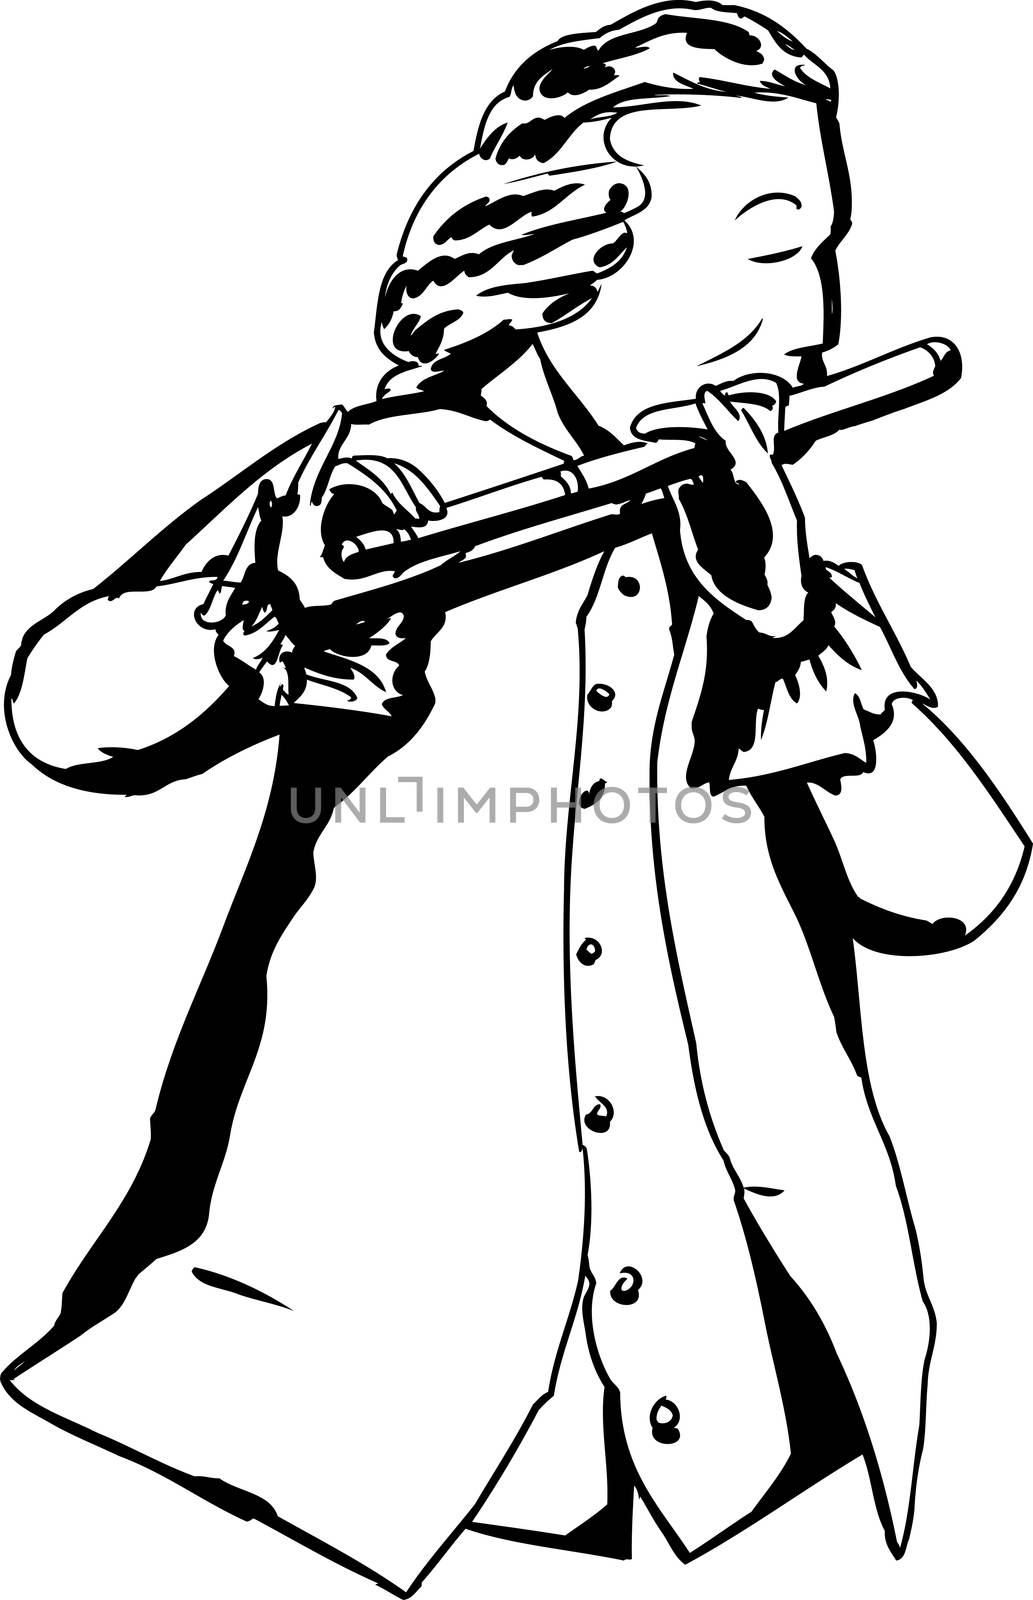 Outline of 18th century man playing flute by TheBlackRhino